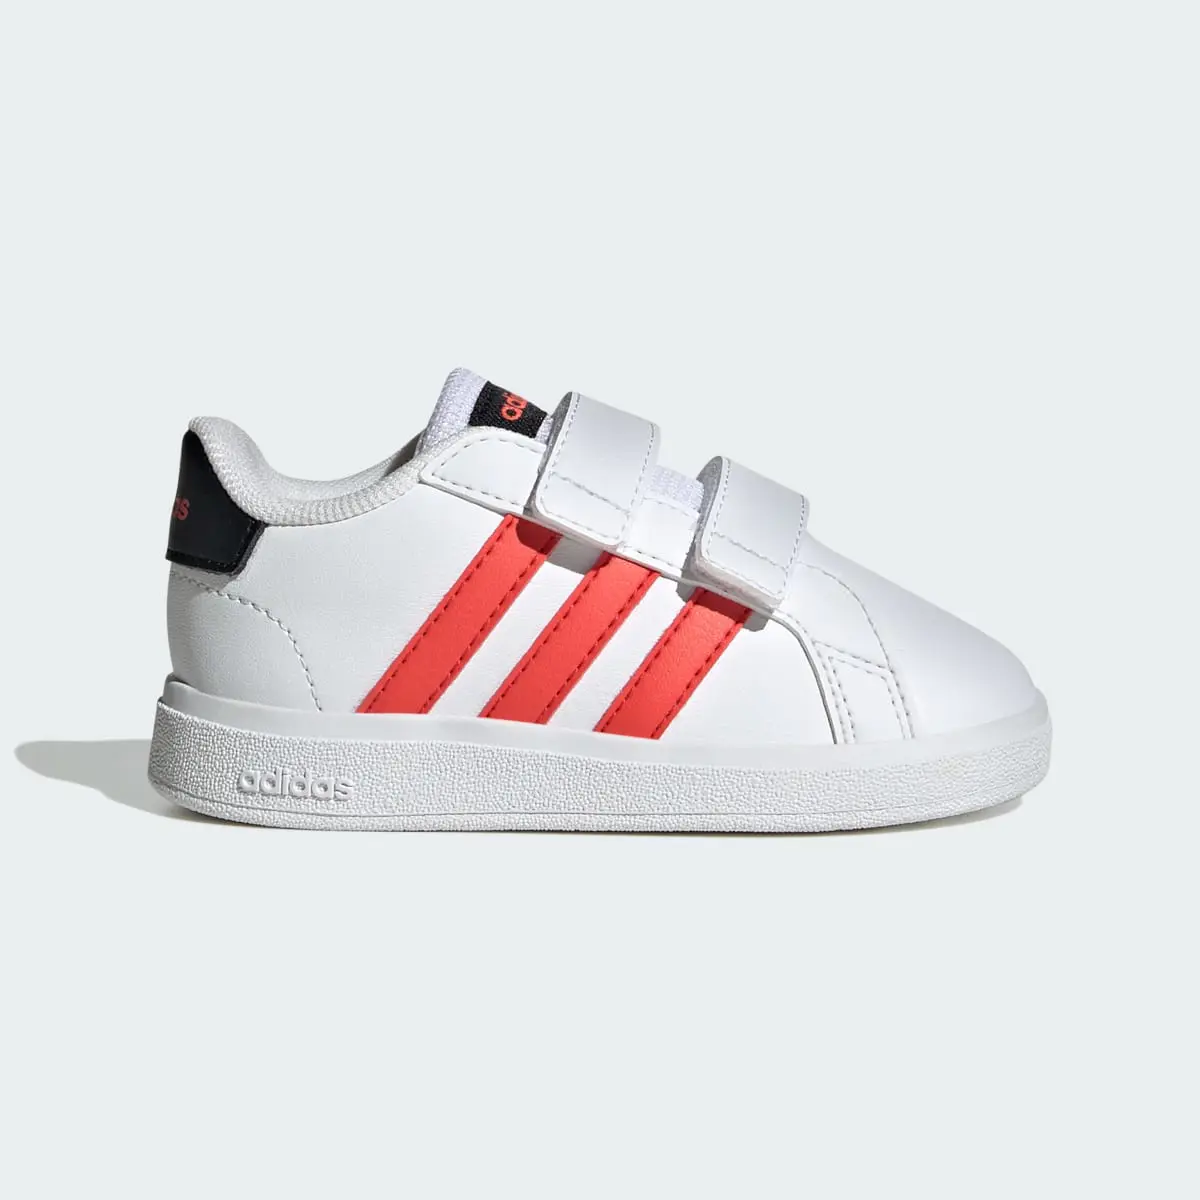 Adidas Grand Court Lifestyle Hook and Loop Schuh. 2